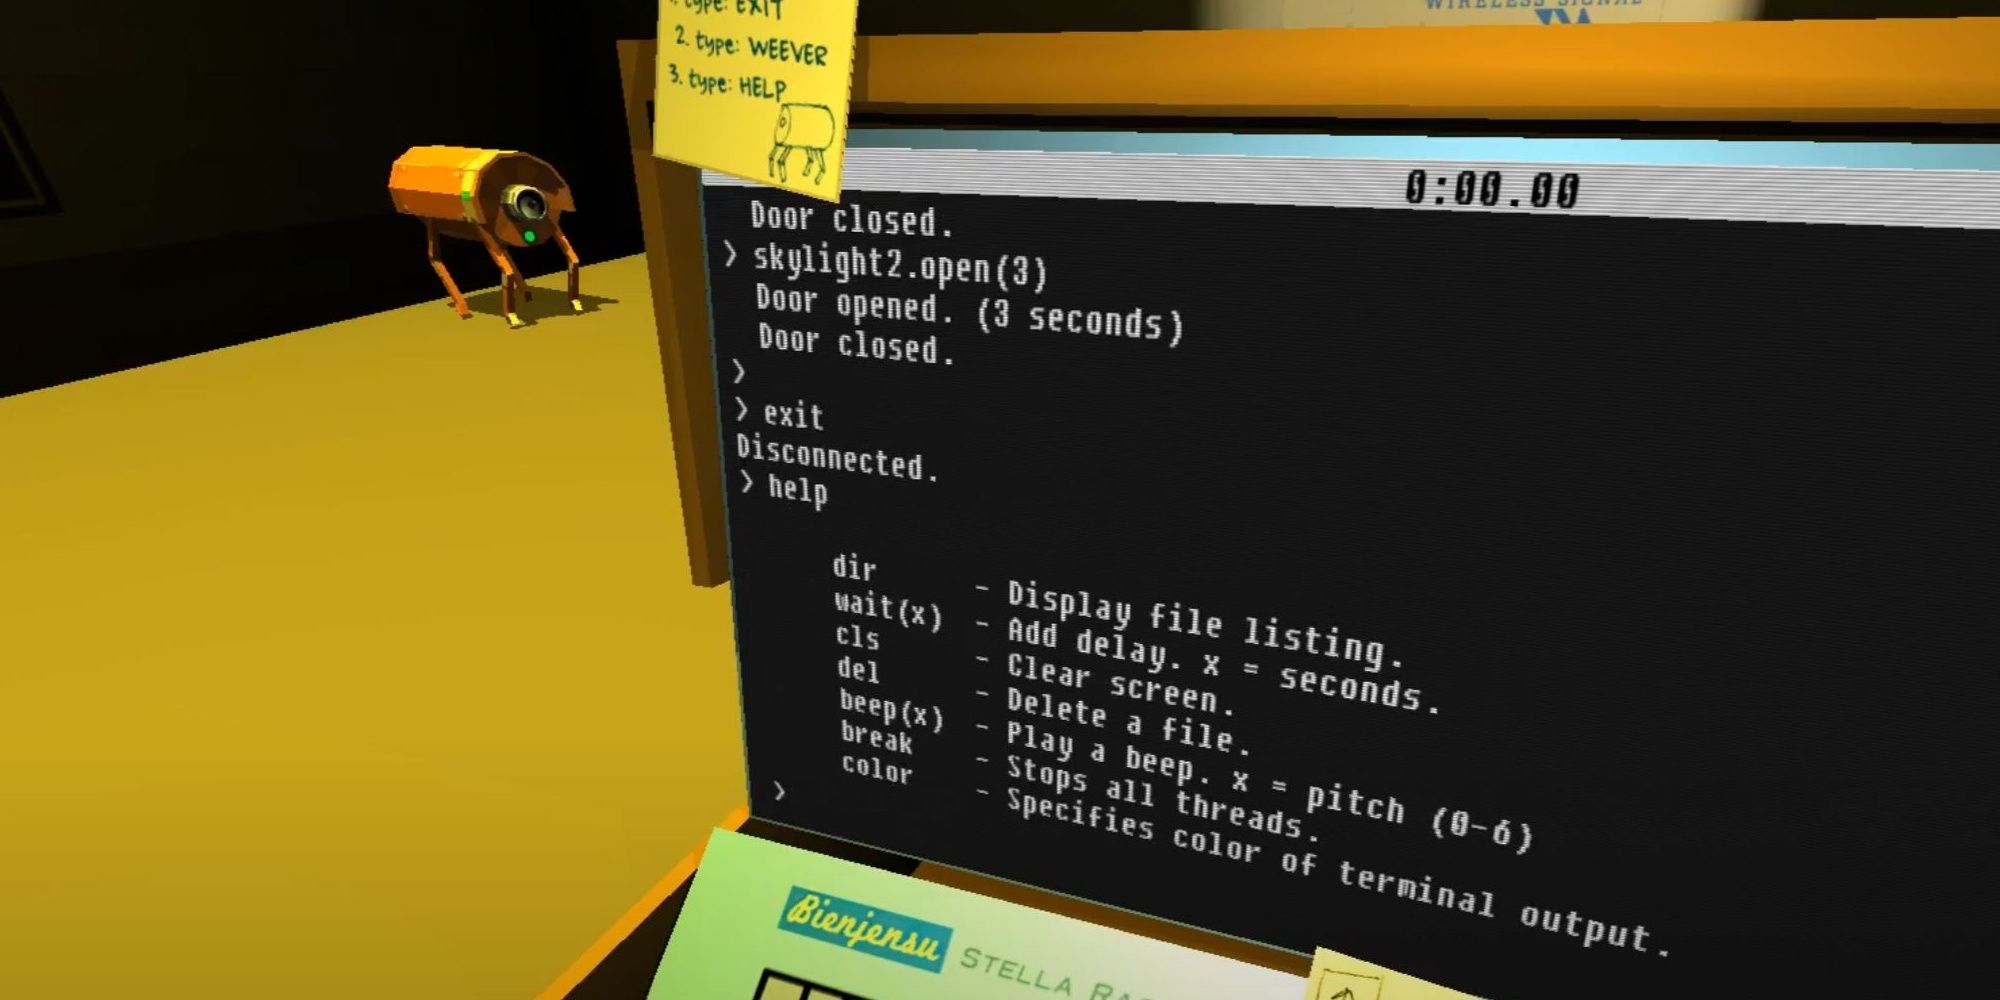 quadrilateral cowboy, hacking deck, weever in back